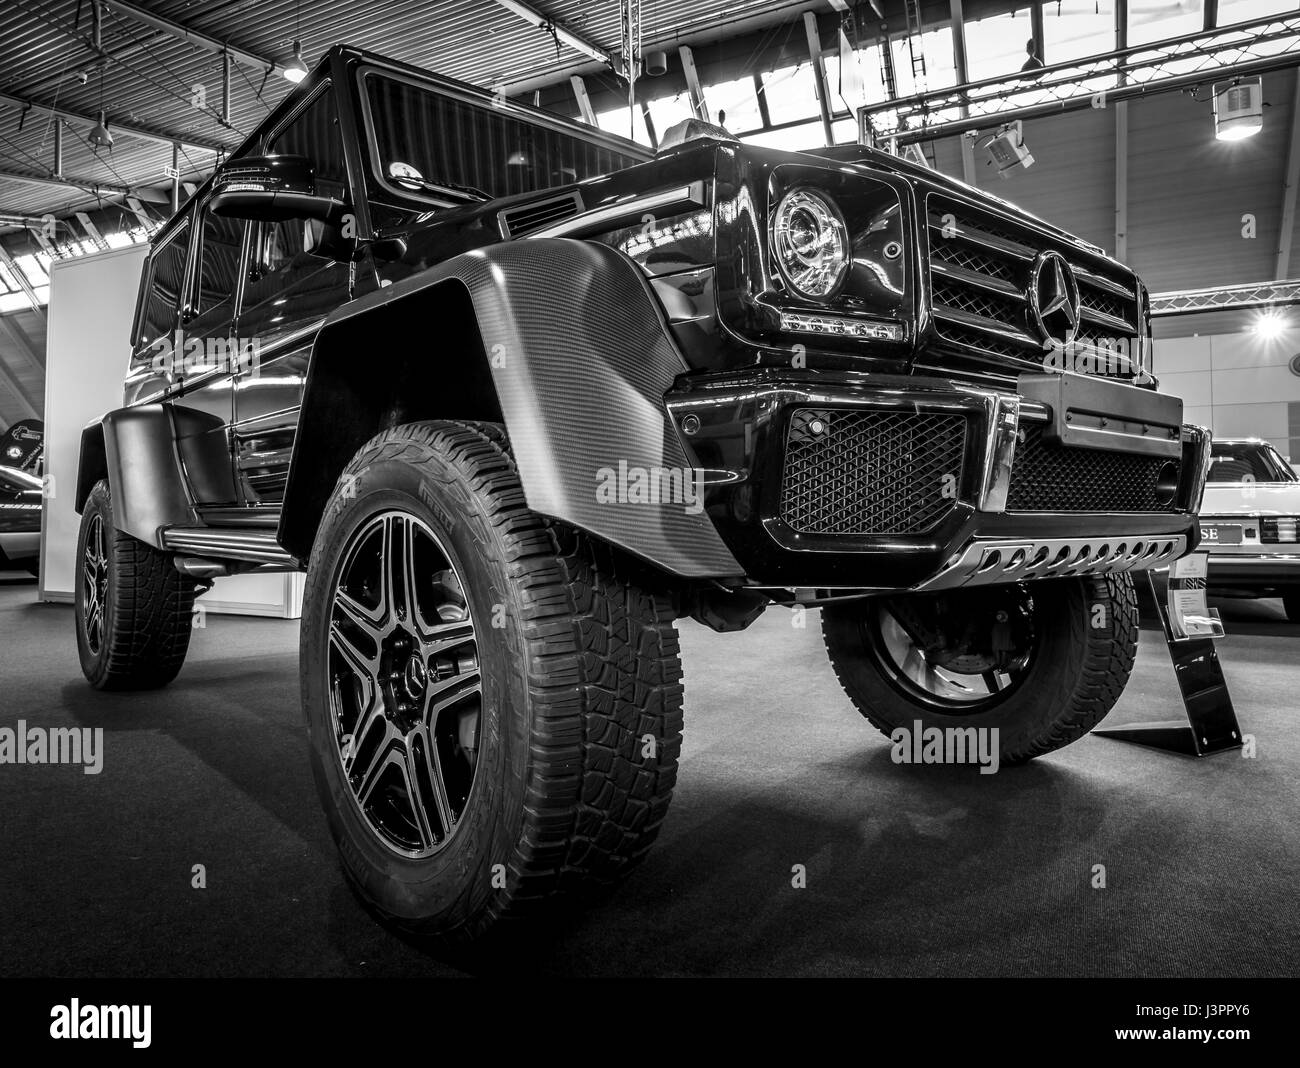 STUTTGART, GERMANY - MARCH 03, 2017: Off-road car Mercedes-Benz G500 4x4 2. Black and white. Europe's greatest classic car exhibition 'RETRO CLASSICS' Stock Photo